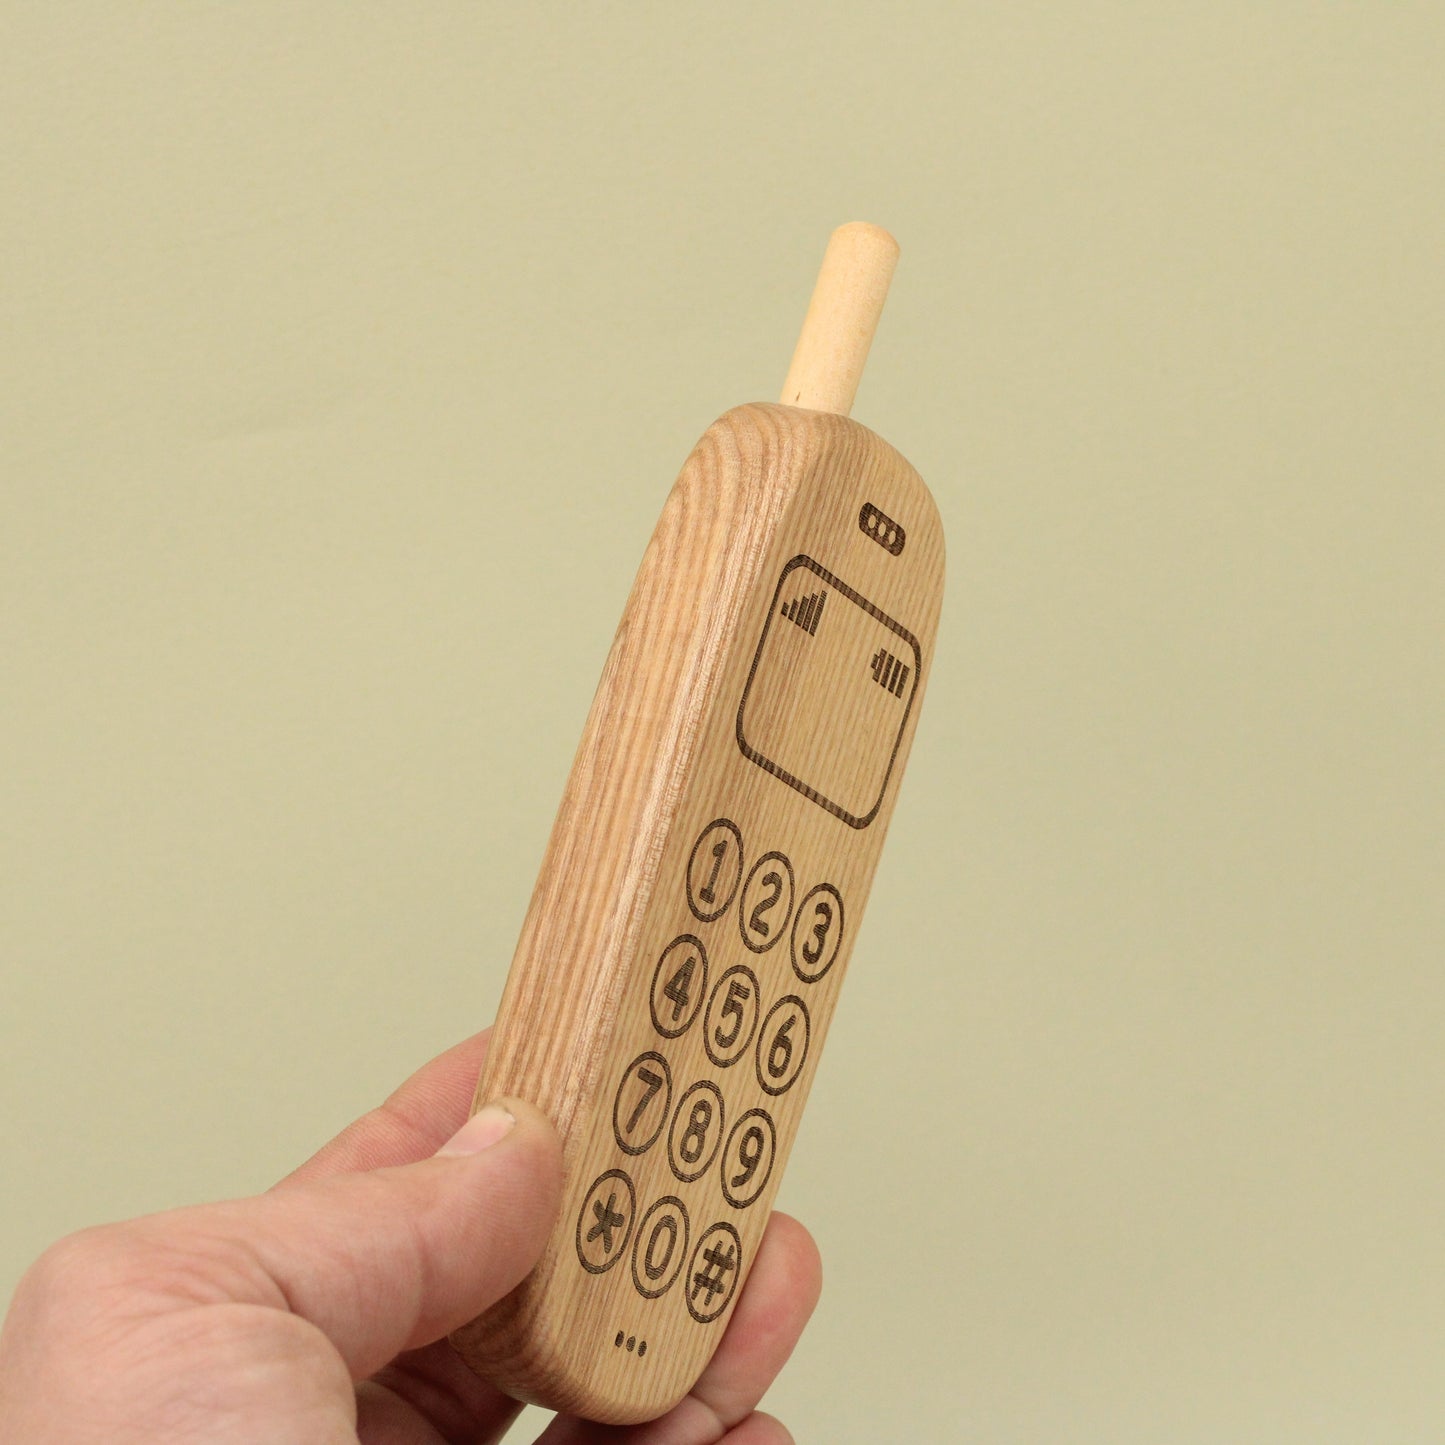 Lotes Toys Wooden Mobile Phone LE01